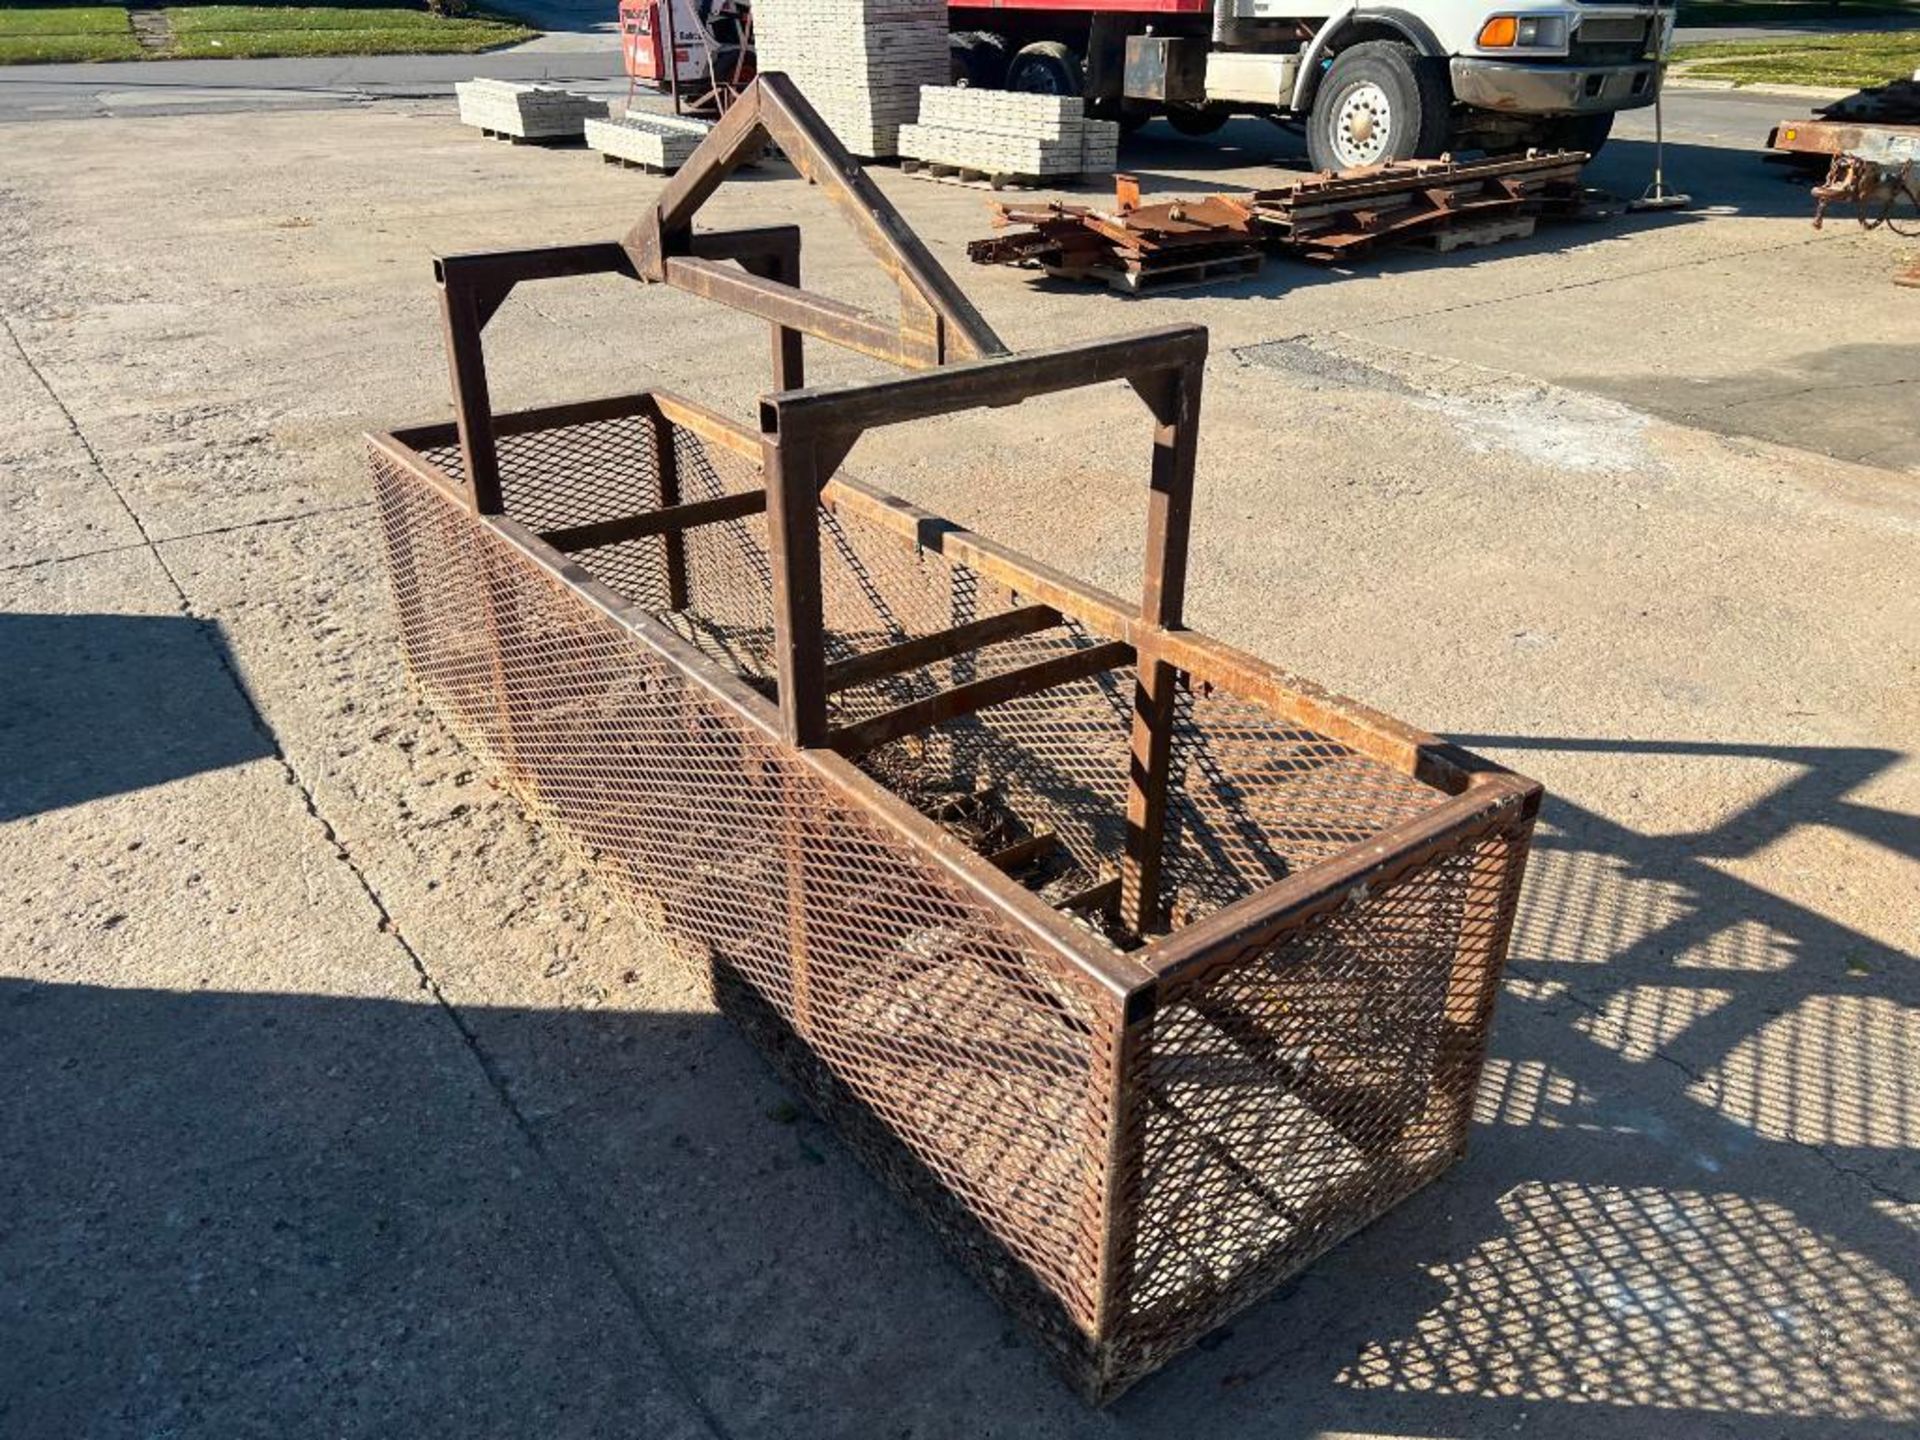 5' x 8' x 28" Form Basket. Located in Mt. Pleasant, IA - Image 3 of 4